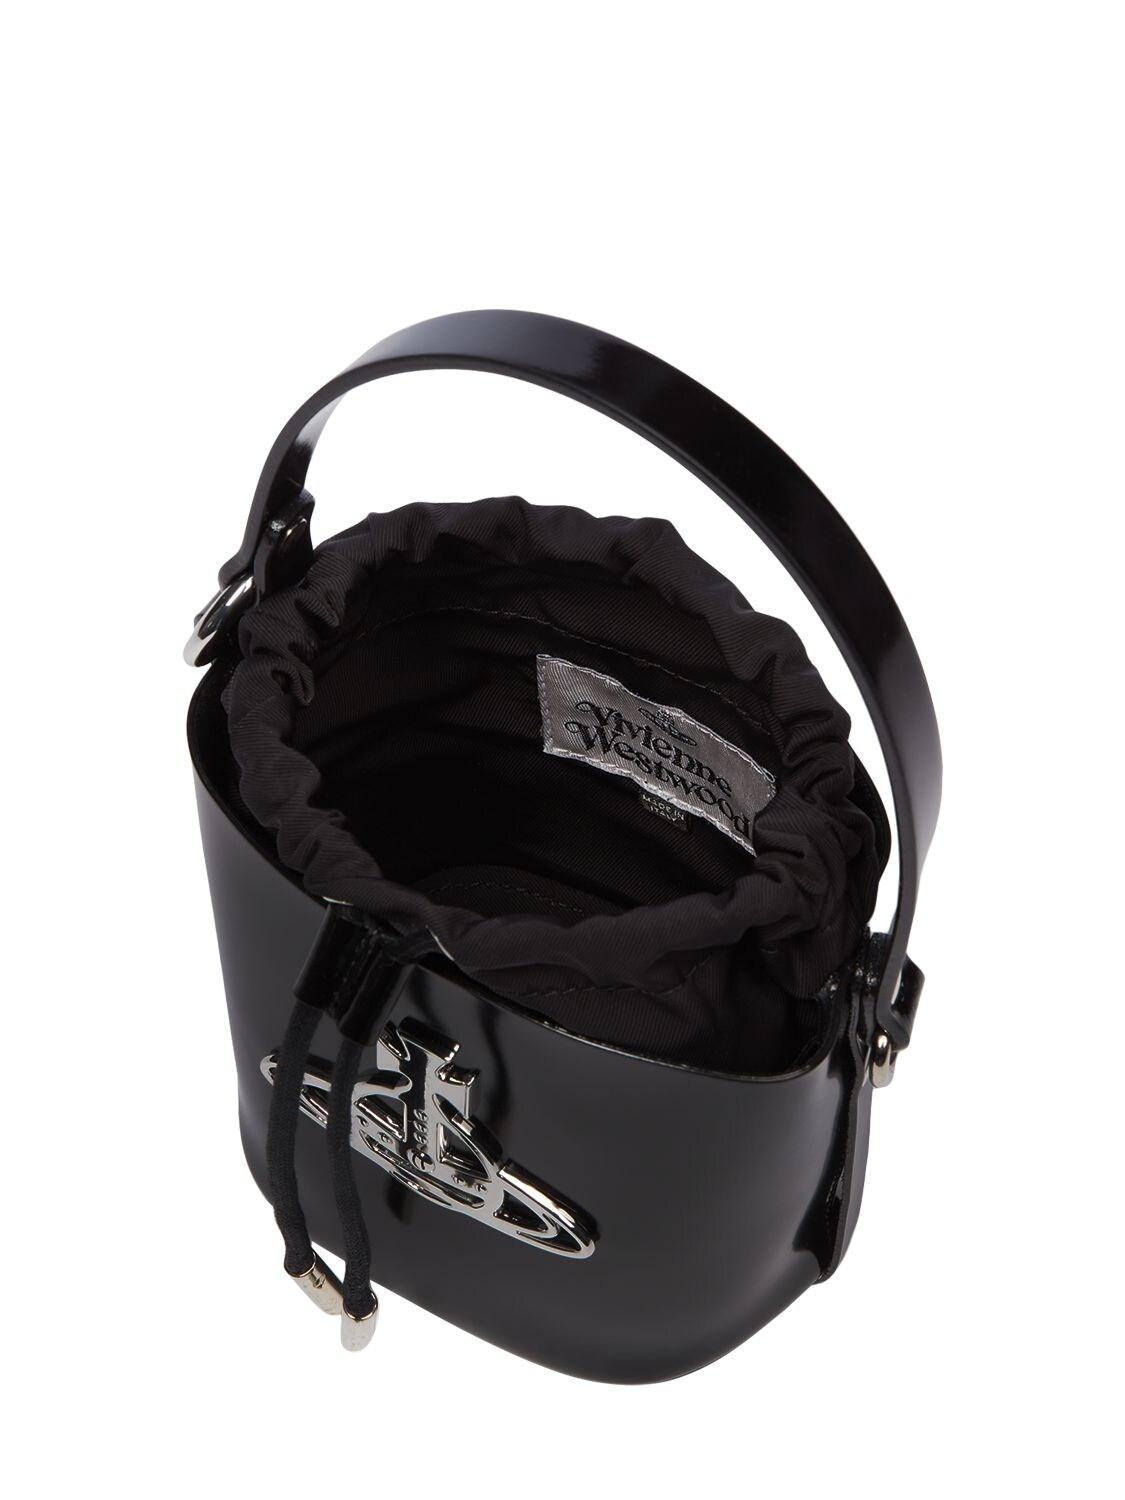 Vivienne Westwood Small Daisy Patent Leather Bucket Bag in Black 